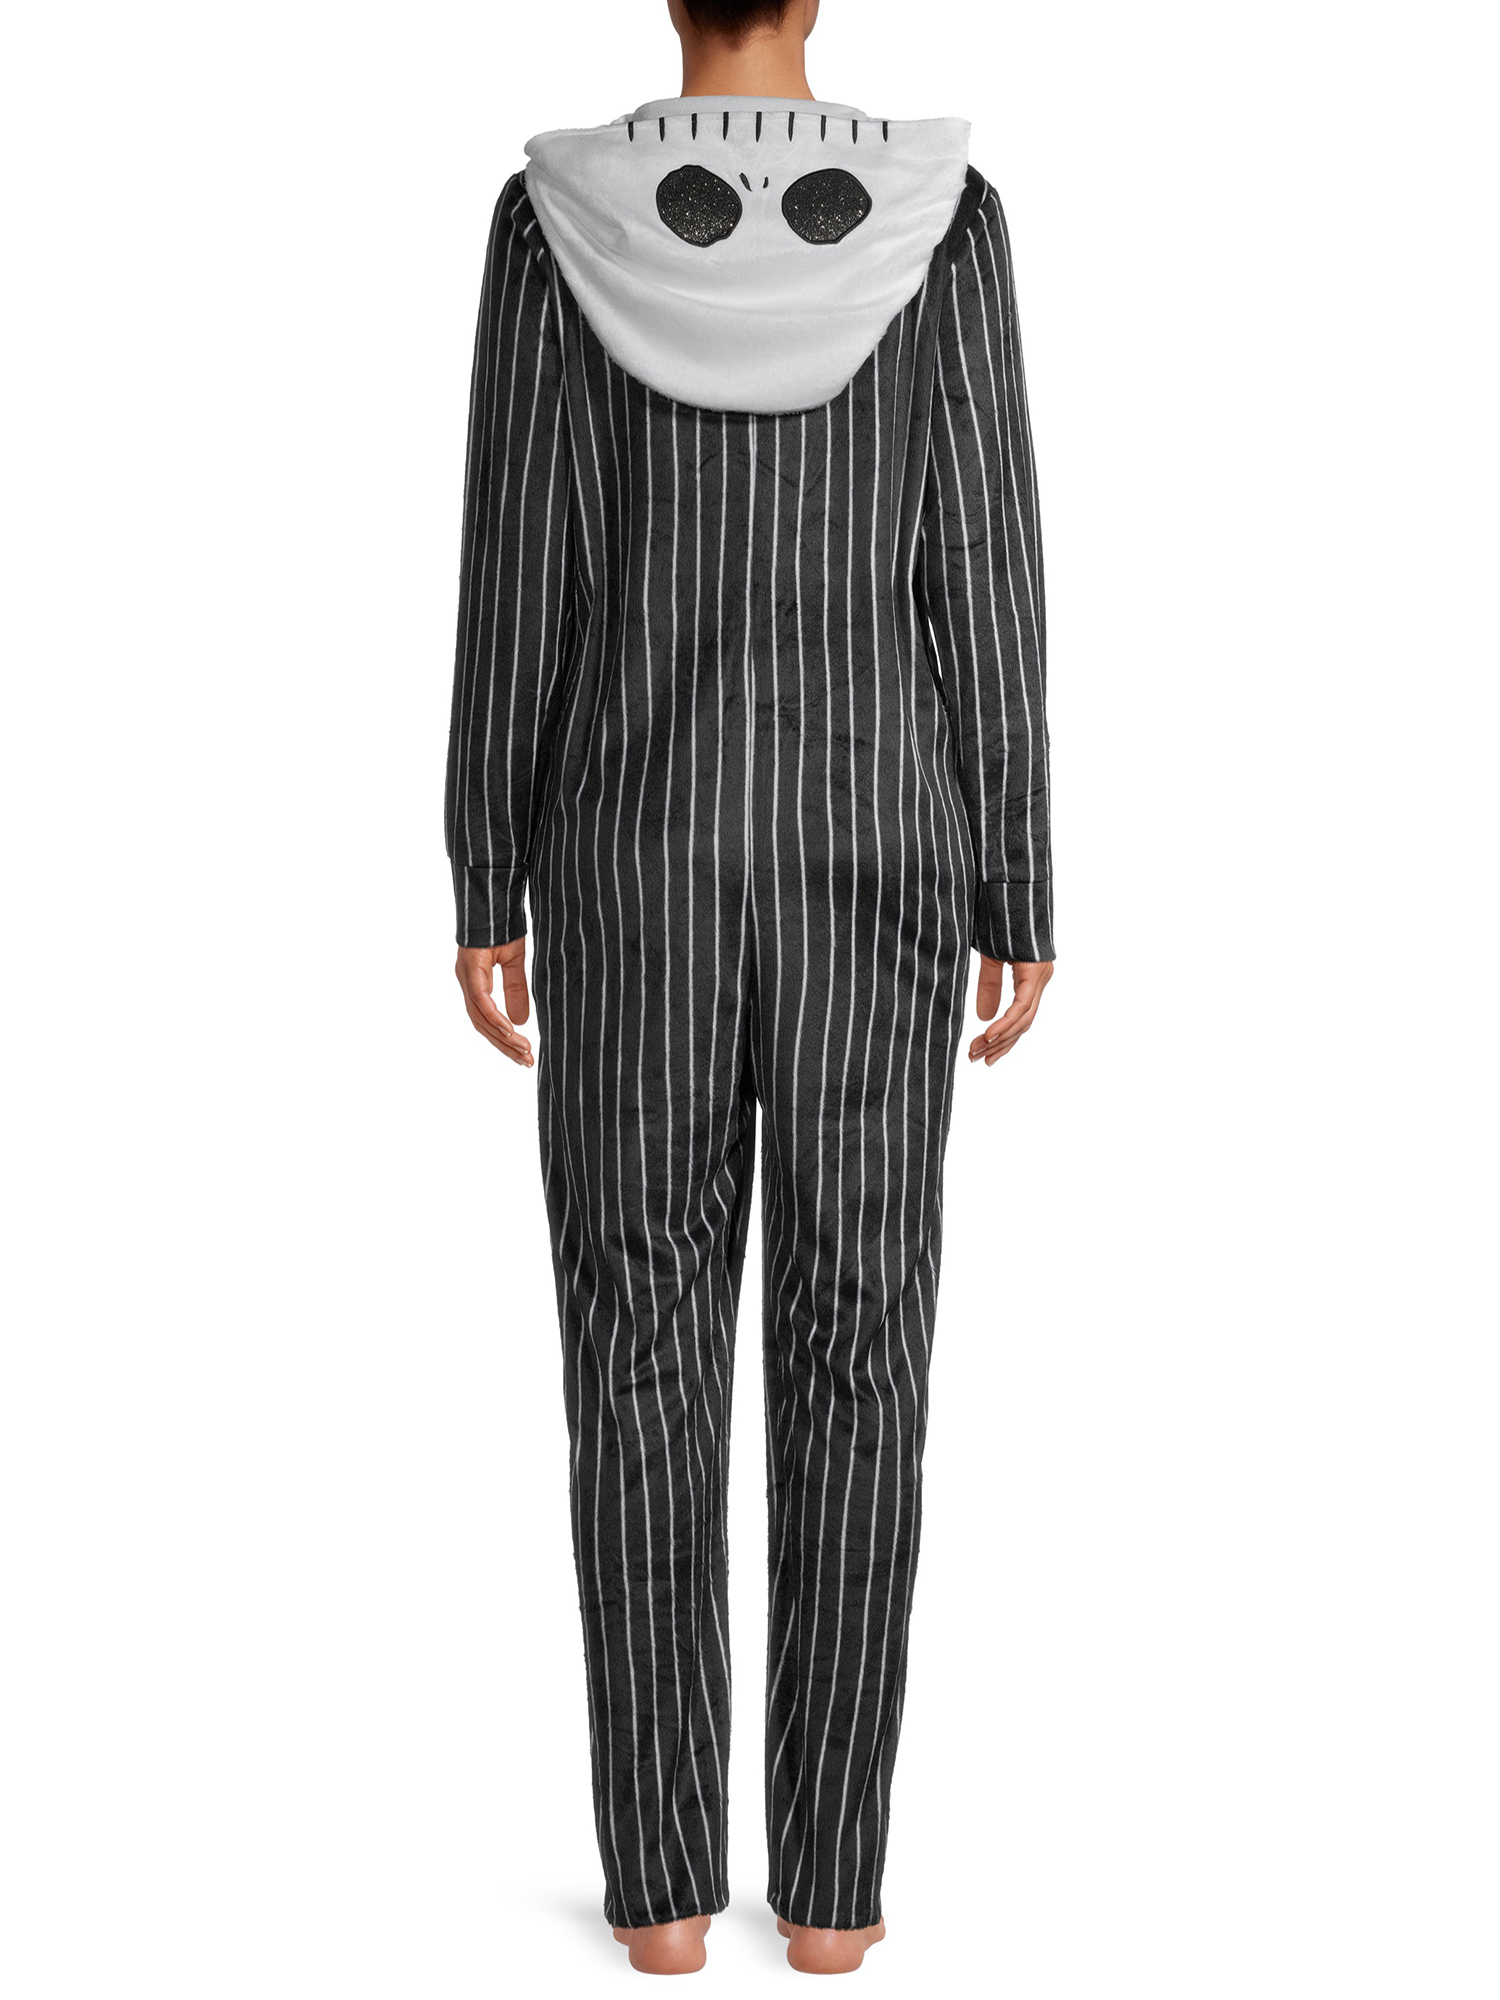 Disney Women's Nightmare Before Christmas Hooded Union Suit - image 2 of 6